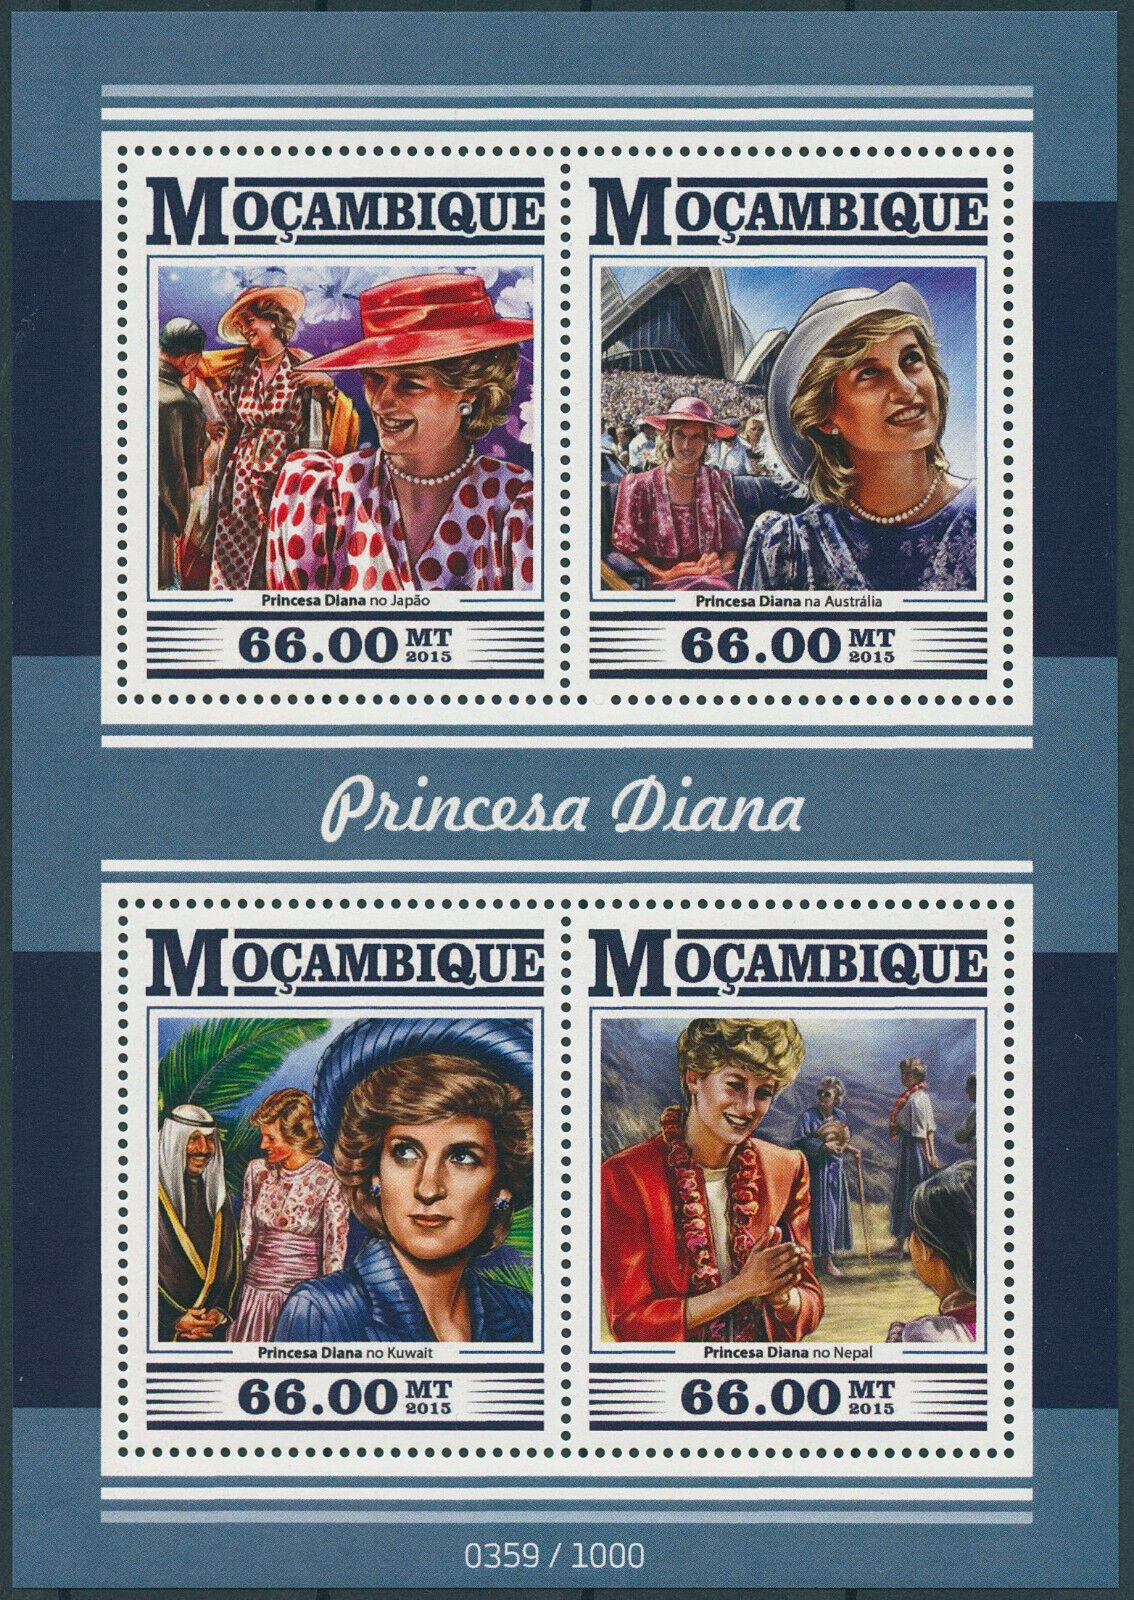 Mozambique 2015 MNH Royalty Stamps Princess Diana of Wales 4v M/S